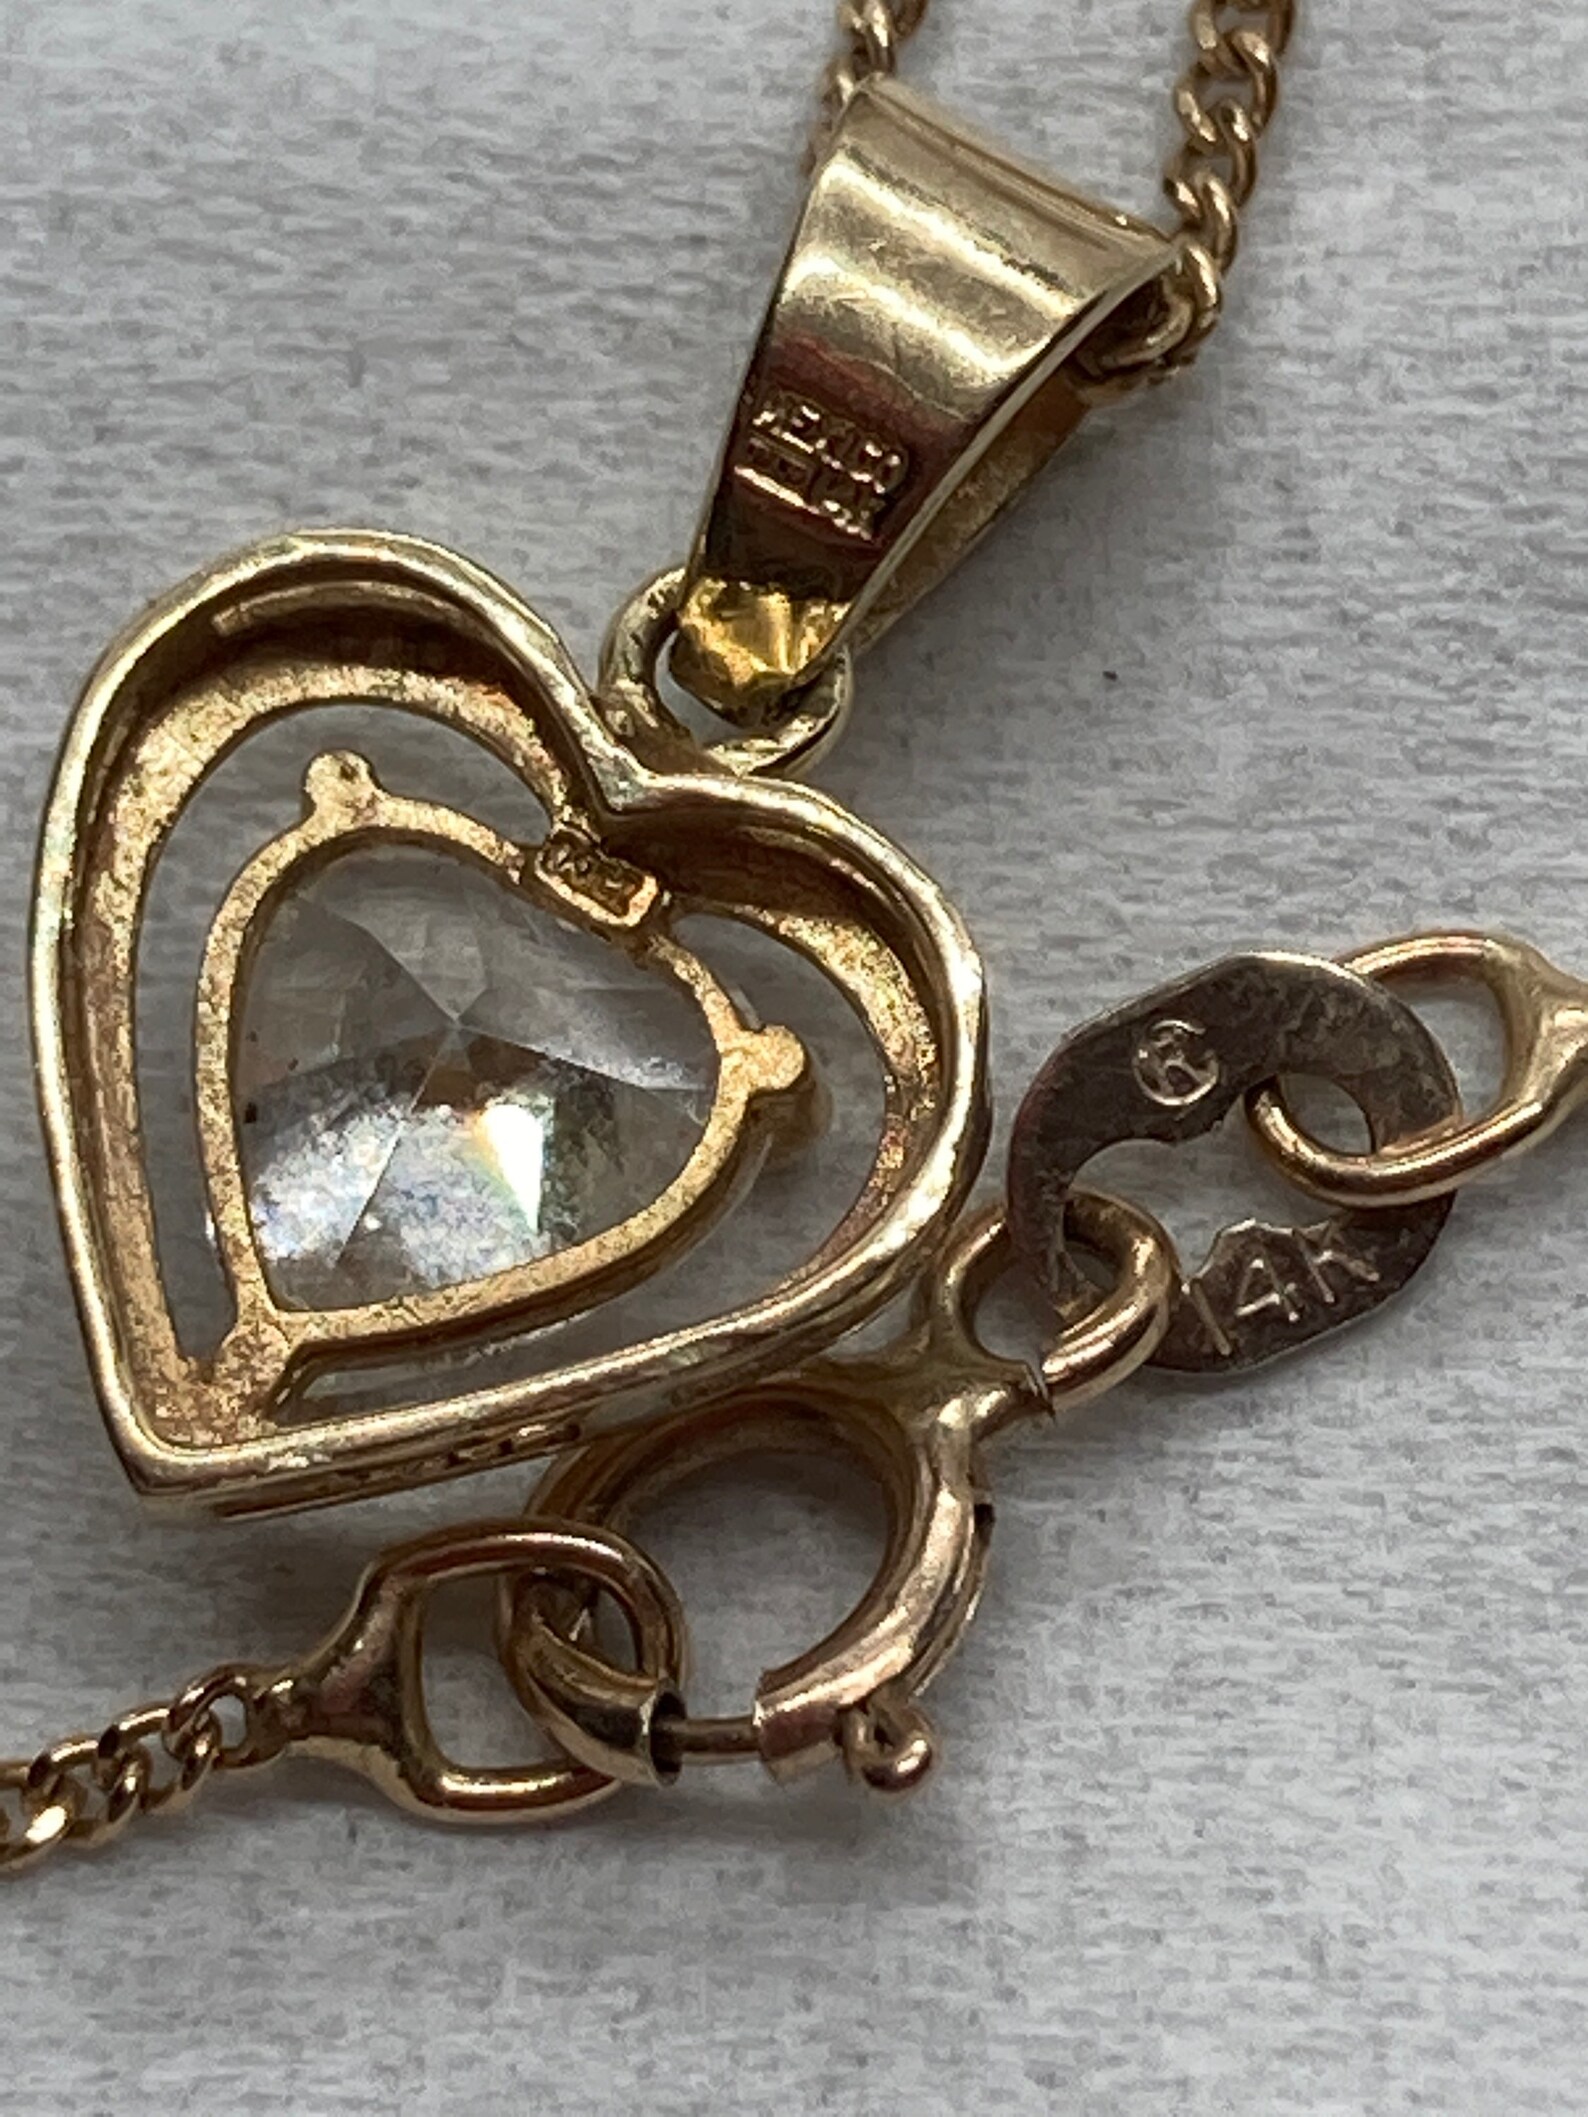 Vintage 14ct gold heart pendant and 14ct gold chain | Etsy